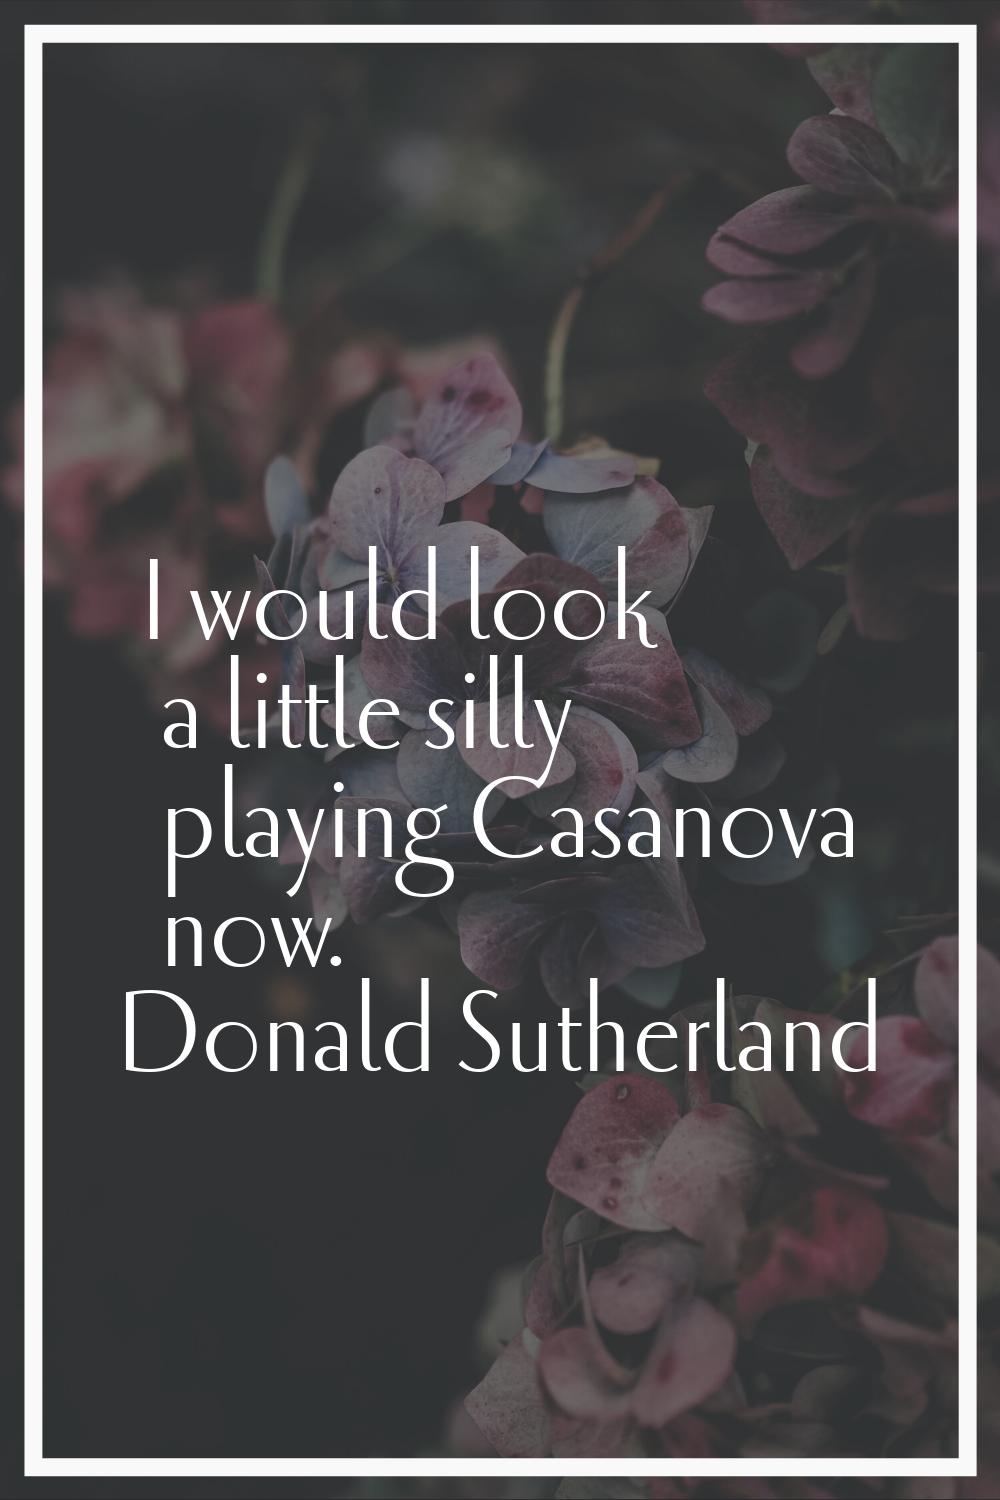 I would look a little silly playing Casanova now.